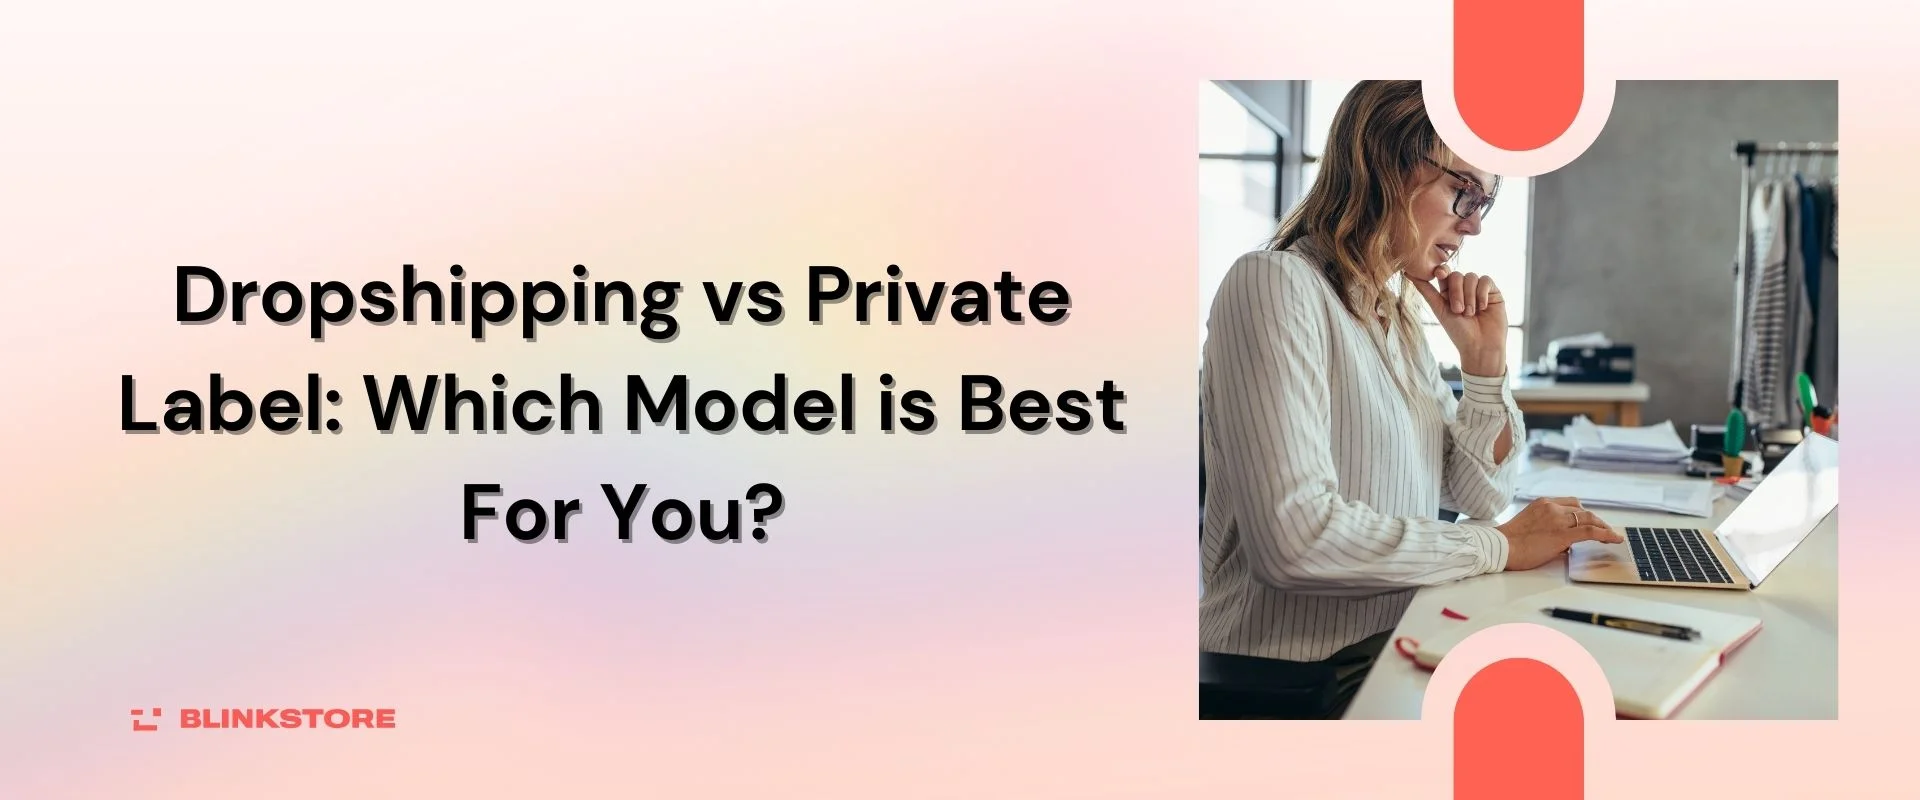 Dropshipping vs Private Label Which Model is Best For You